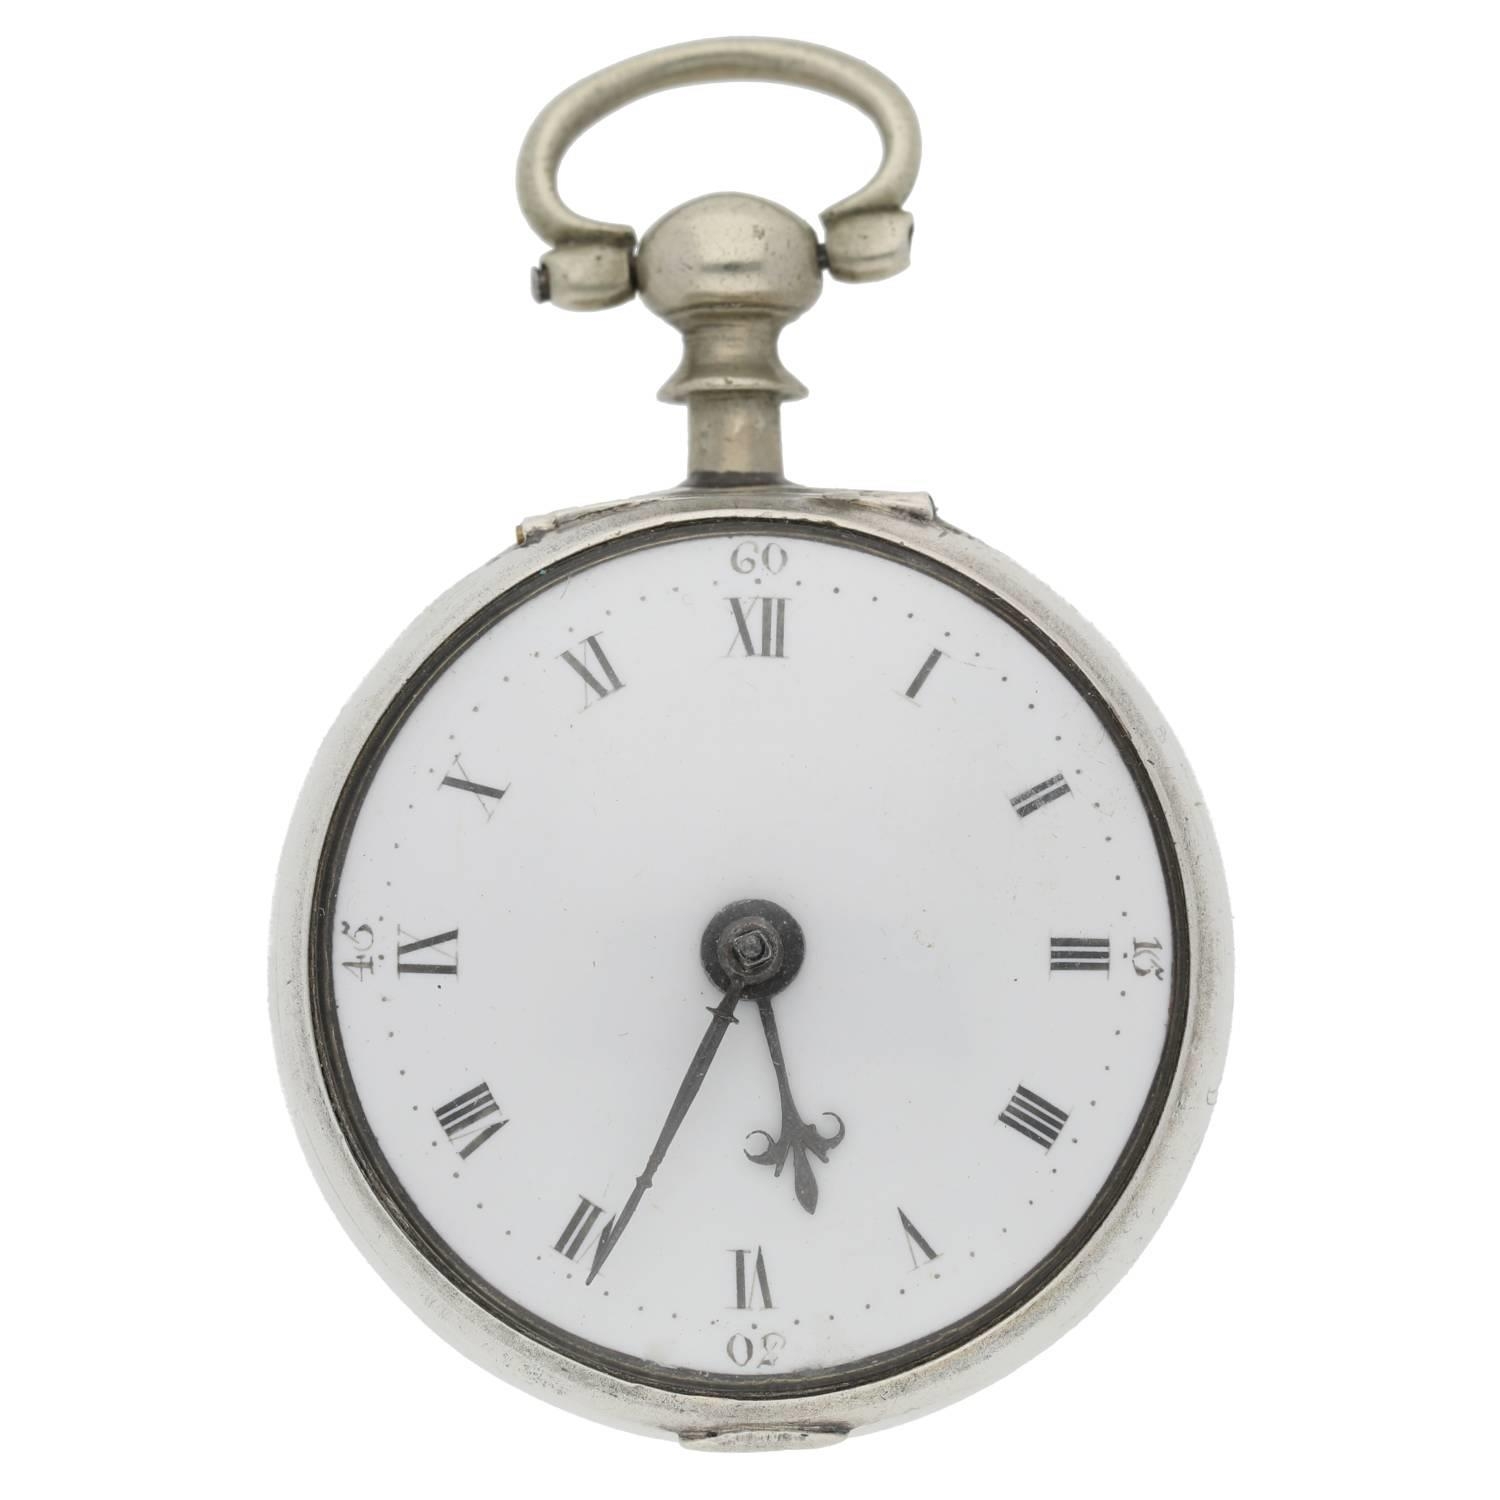 D. Edmonds, Liverpool - English George III silver pair cased verge pocket watch, London 1778, signed - Image 3 of 10